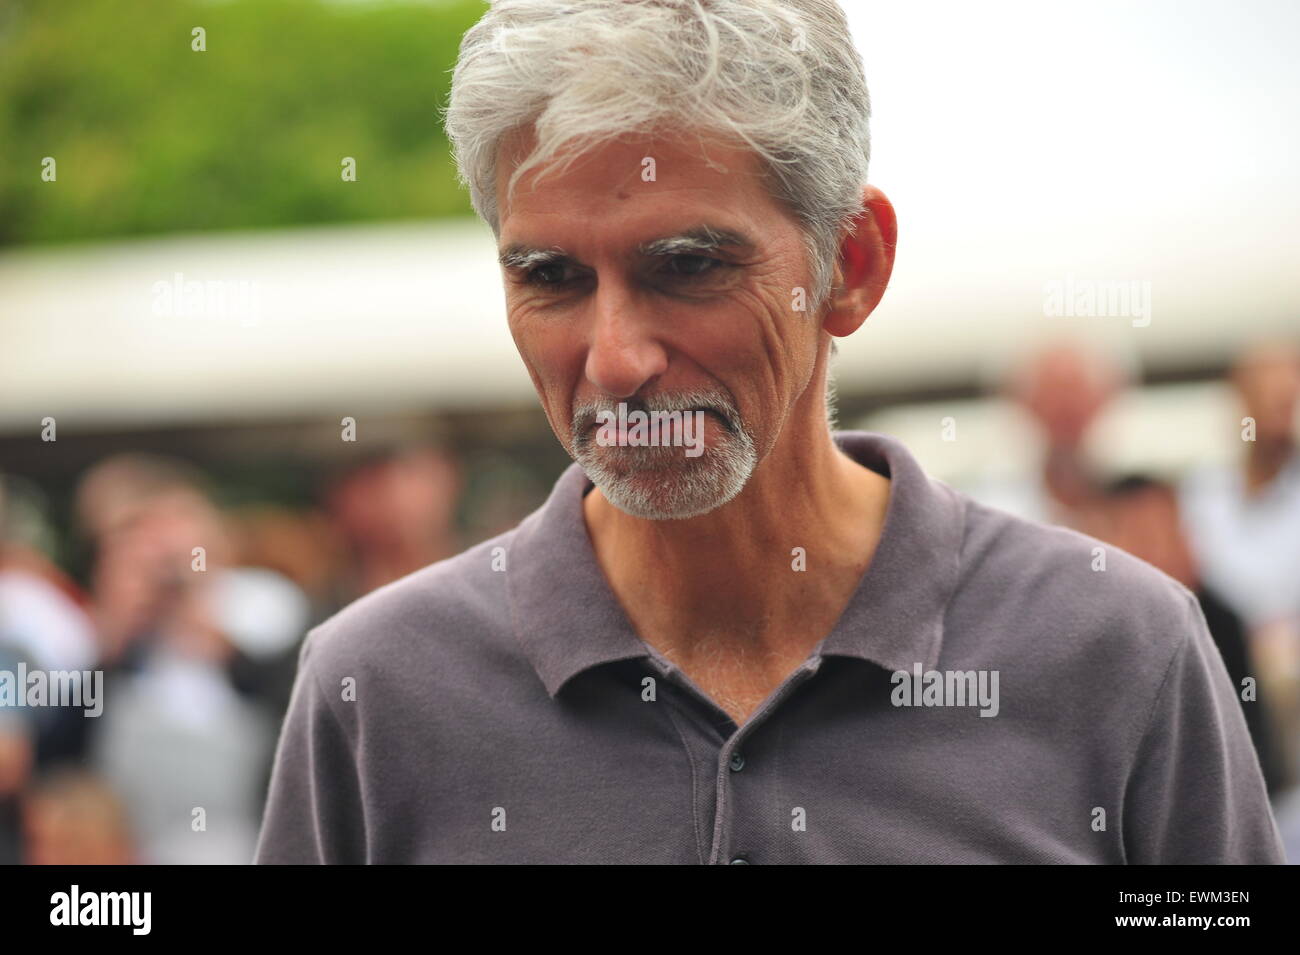 1997 F1 World Champion Damon Hill at the Goodwood Festival of Speed. Racing drivers, celebrities and thousands of members of the public attended the Goodwood Festival of Speed to see modern and old racing cars and bikes in action. Stock Photo